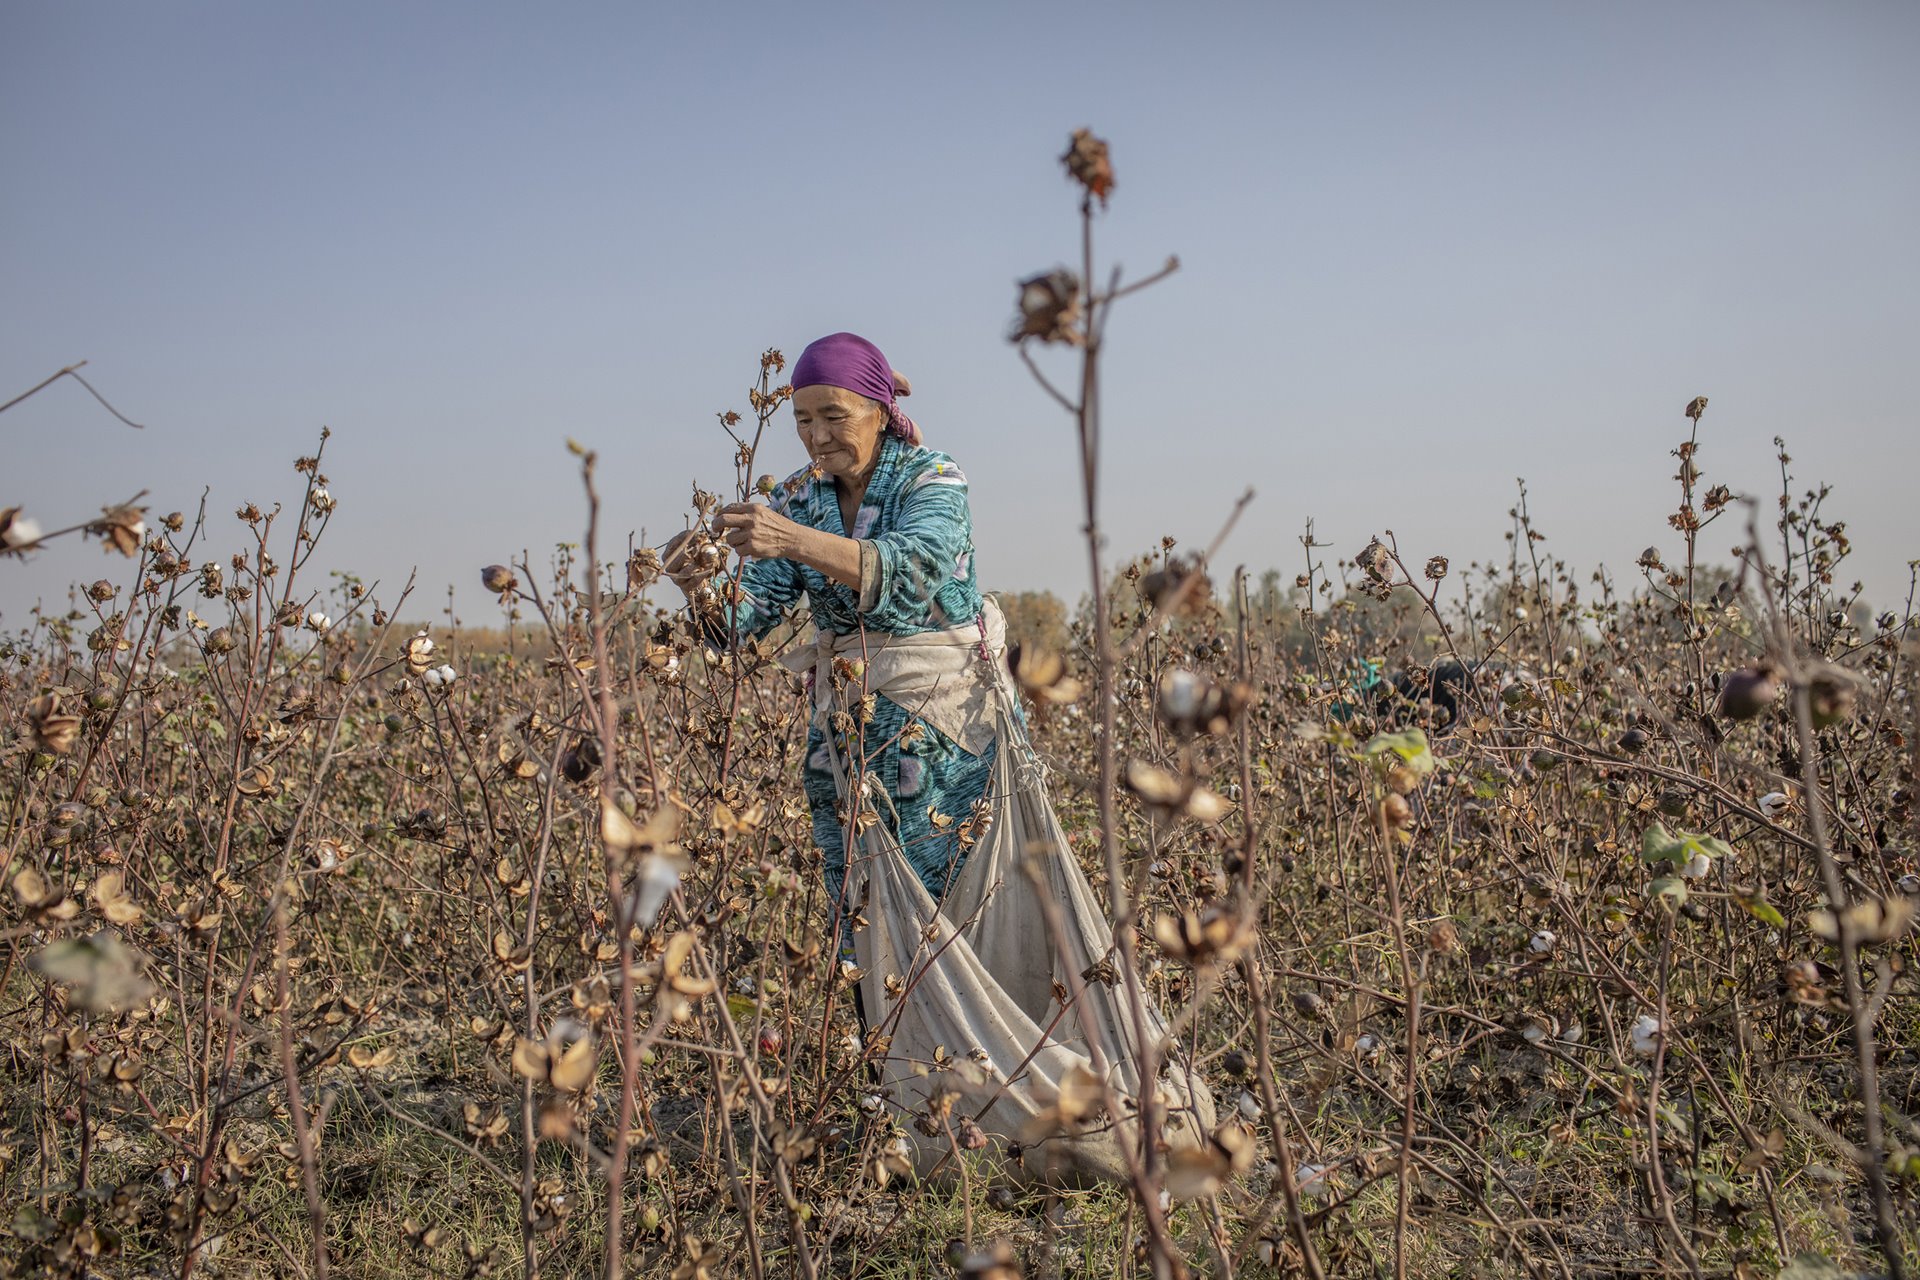 Karima Usmanova (60) picks cotton in a field in Uzbekistan. She is a pensioner, but does this on &nbsp;40 days a year for extra income. The diversion of water from the Syr Darya and Amu Darya rivers in the 1960s to irrigate cotton fields first caused the retreat of the Aral Sea.